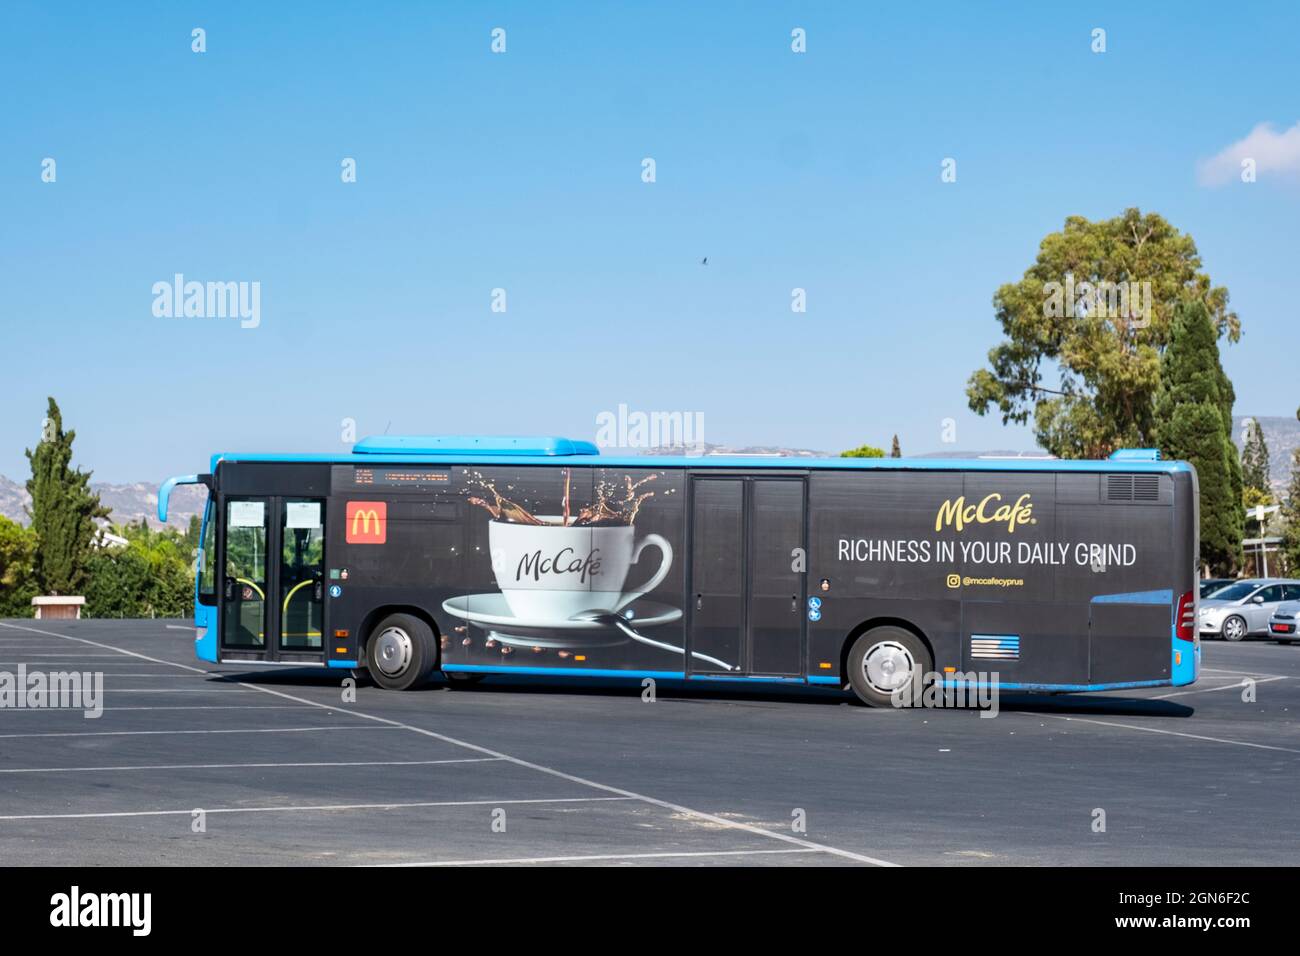 McDonalds McCafe advert on the side of a bus at Coral Bay, Paphos, Cyprus. Stock Photo